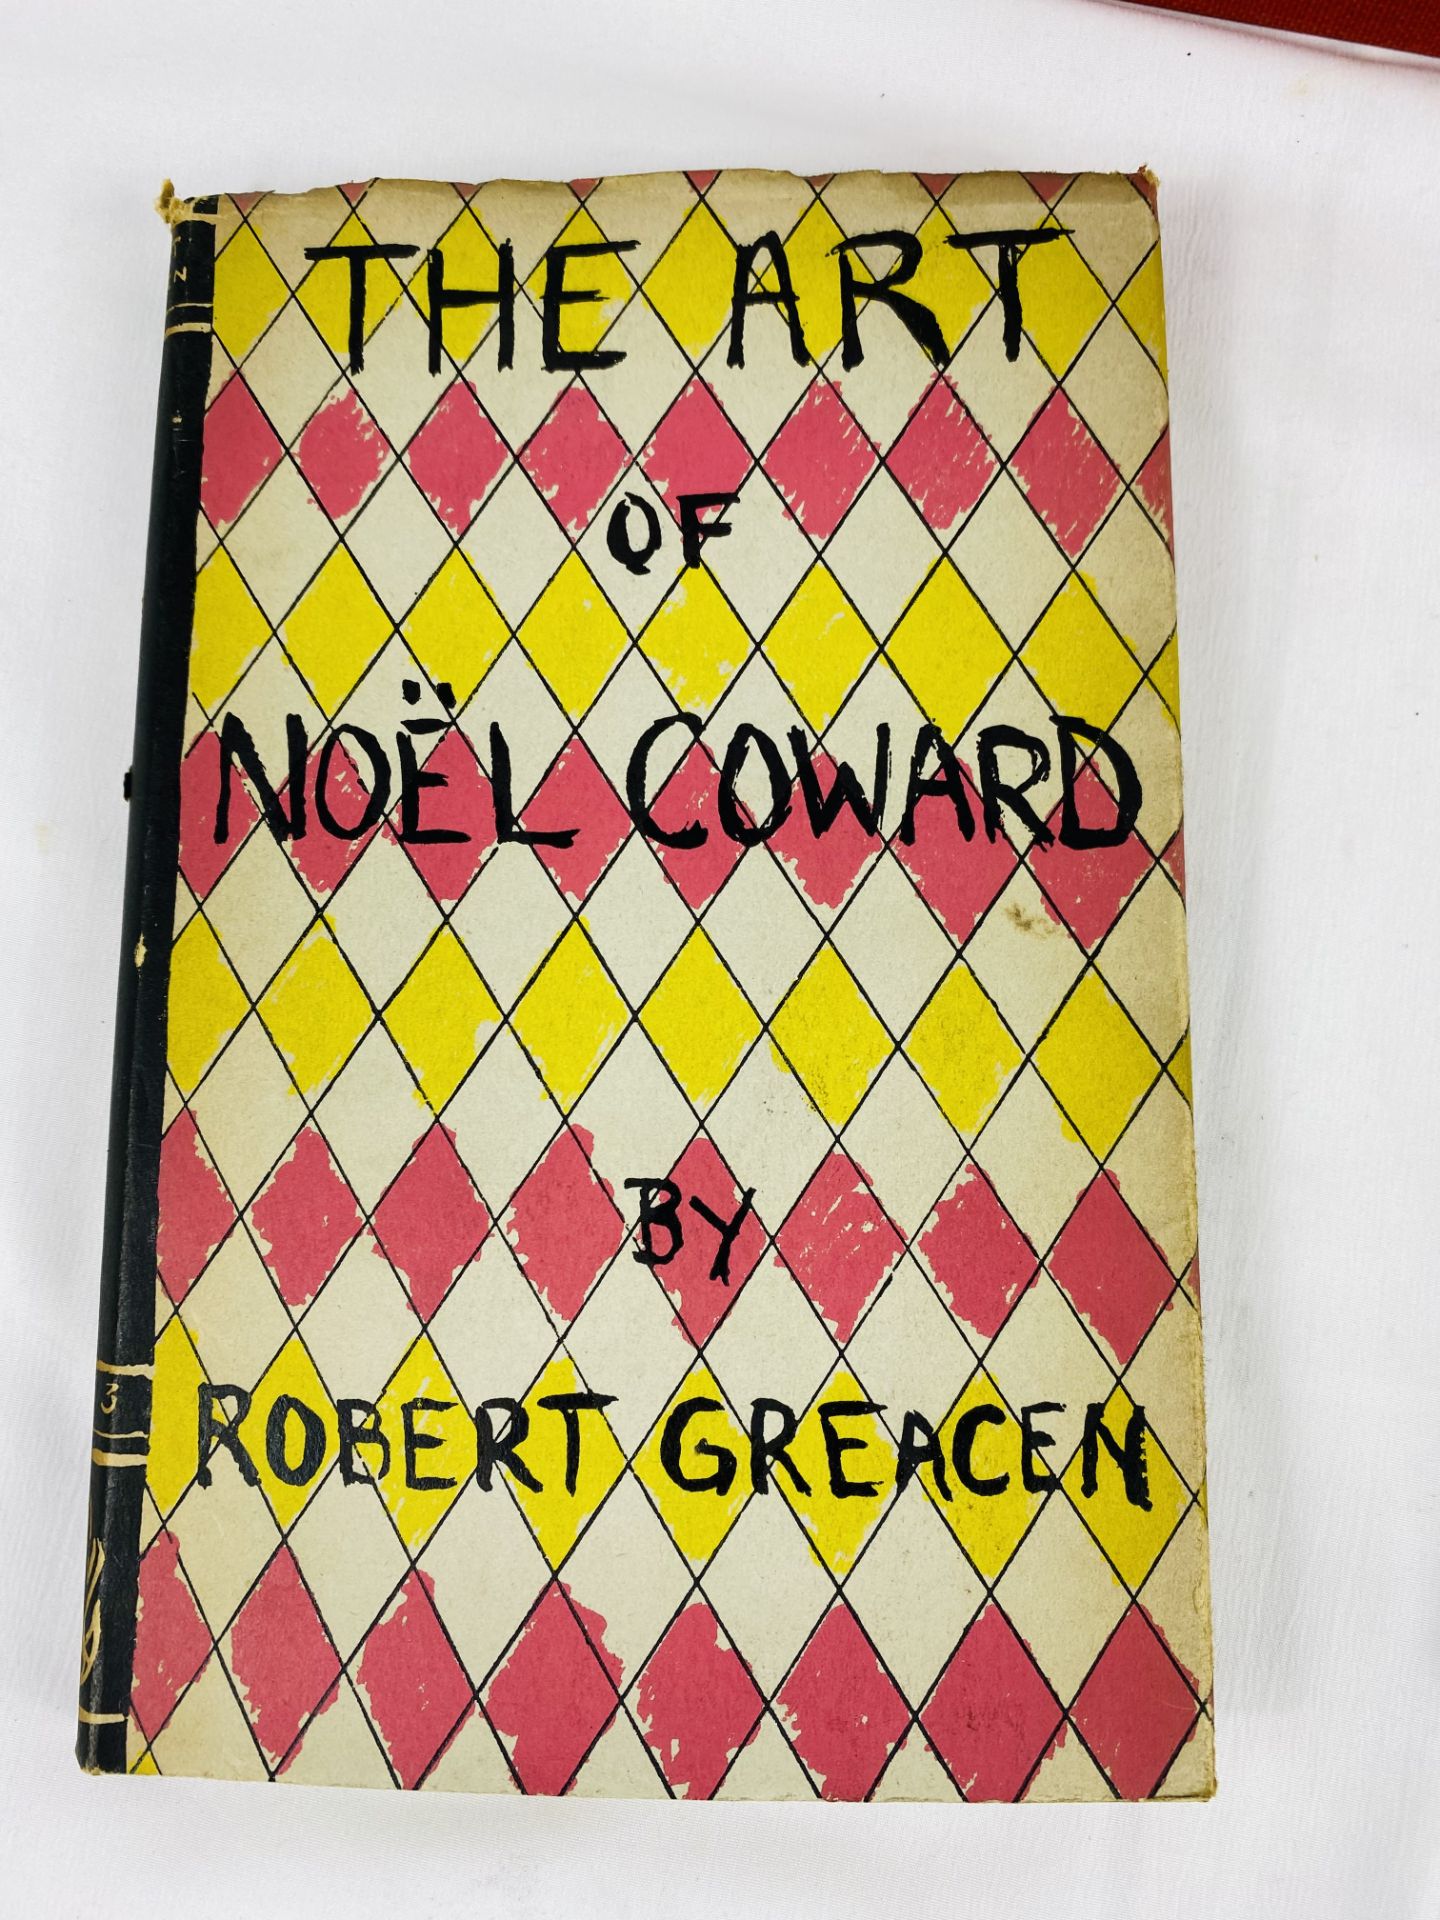 Noel Coward, Quadrille, together with two copies of The Art of Noel Coward by Robert Greacen - Image 2 of 6